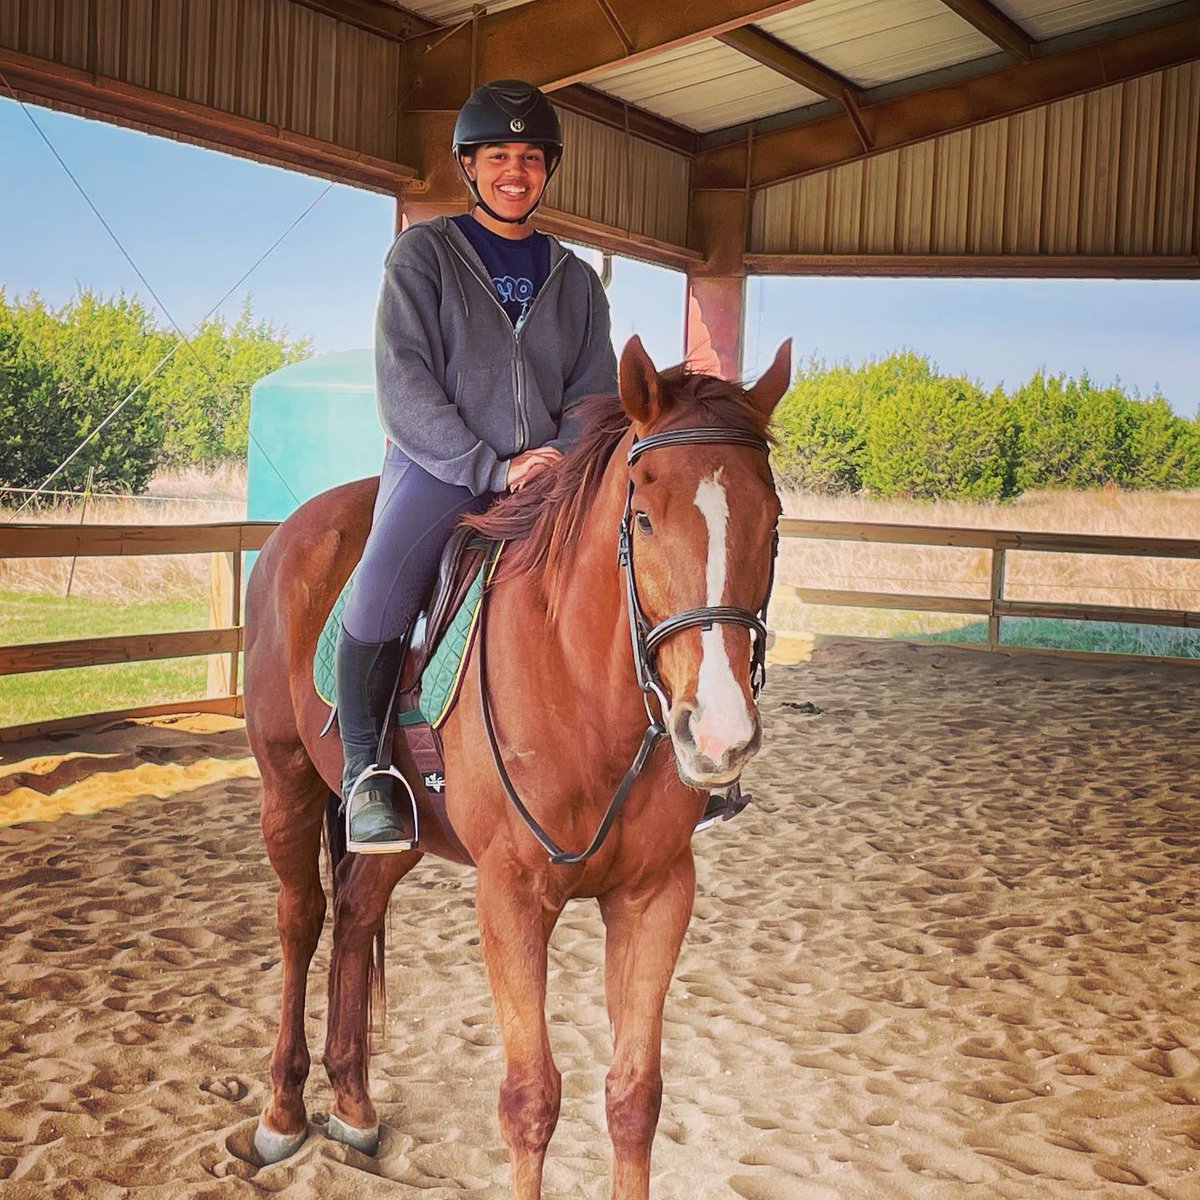 Featuring: LoneStar Outreach to Place Ex-Racers 'LOPE' Location: Driftwood, Texas “Thoroughbred Aftercare Alliance has been a tremendous help to LOPE! Thanks to its support, LOPE can commit to horses that need longer-term rehab...' Learn more here: thoroughbredaftercare.org/lonestar-outre…